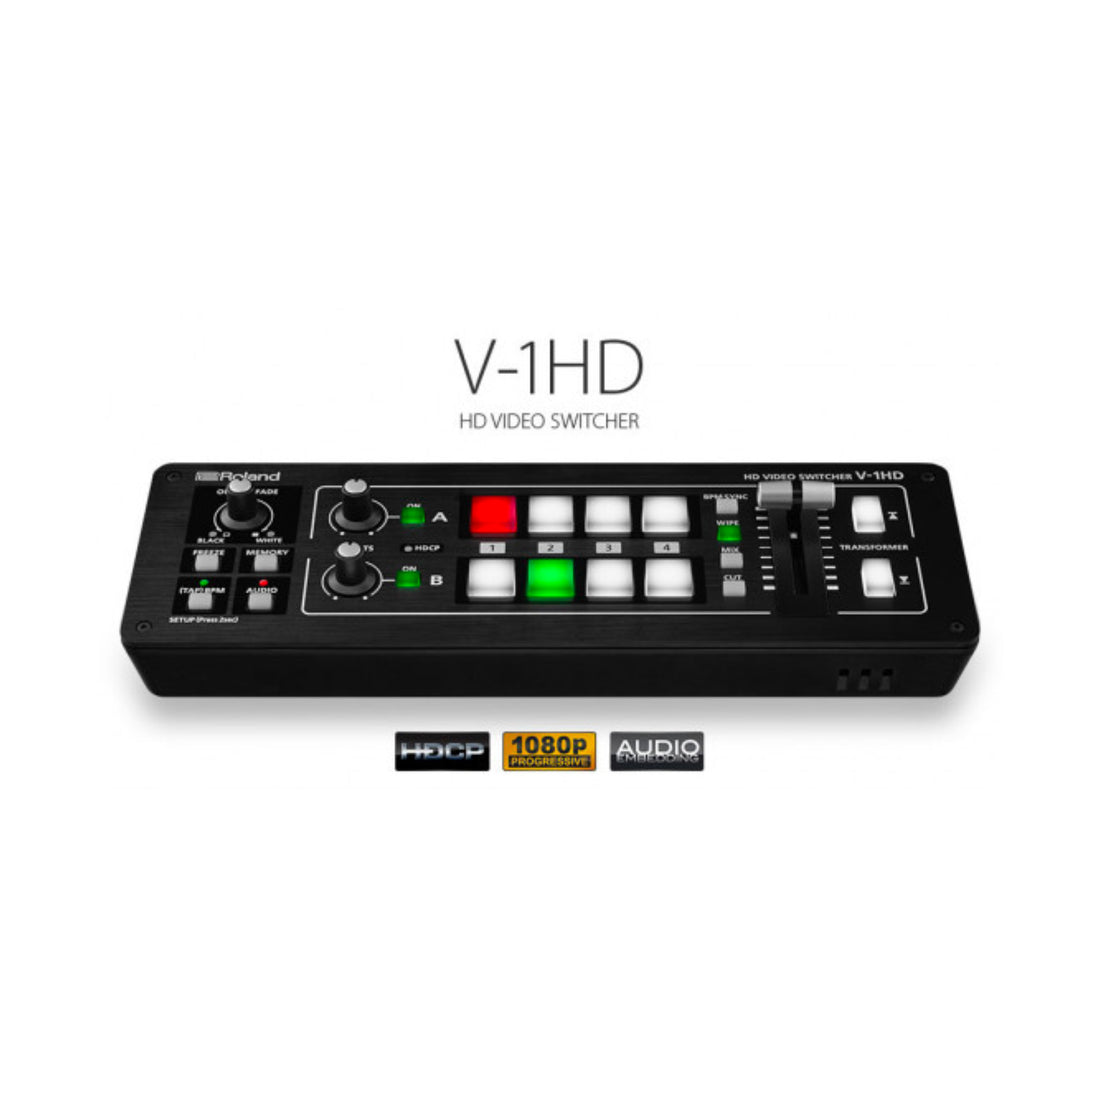 Roland V-1HD Portable 4-Channel HD Video Switcher